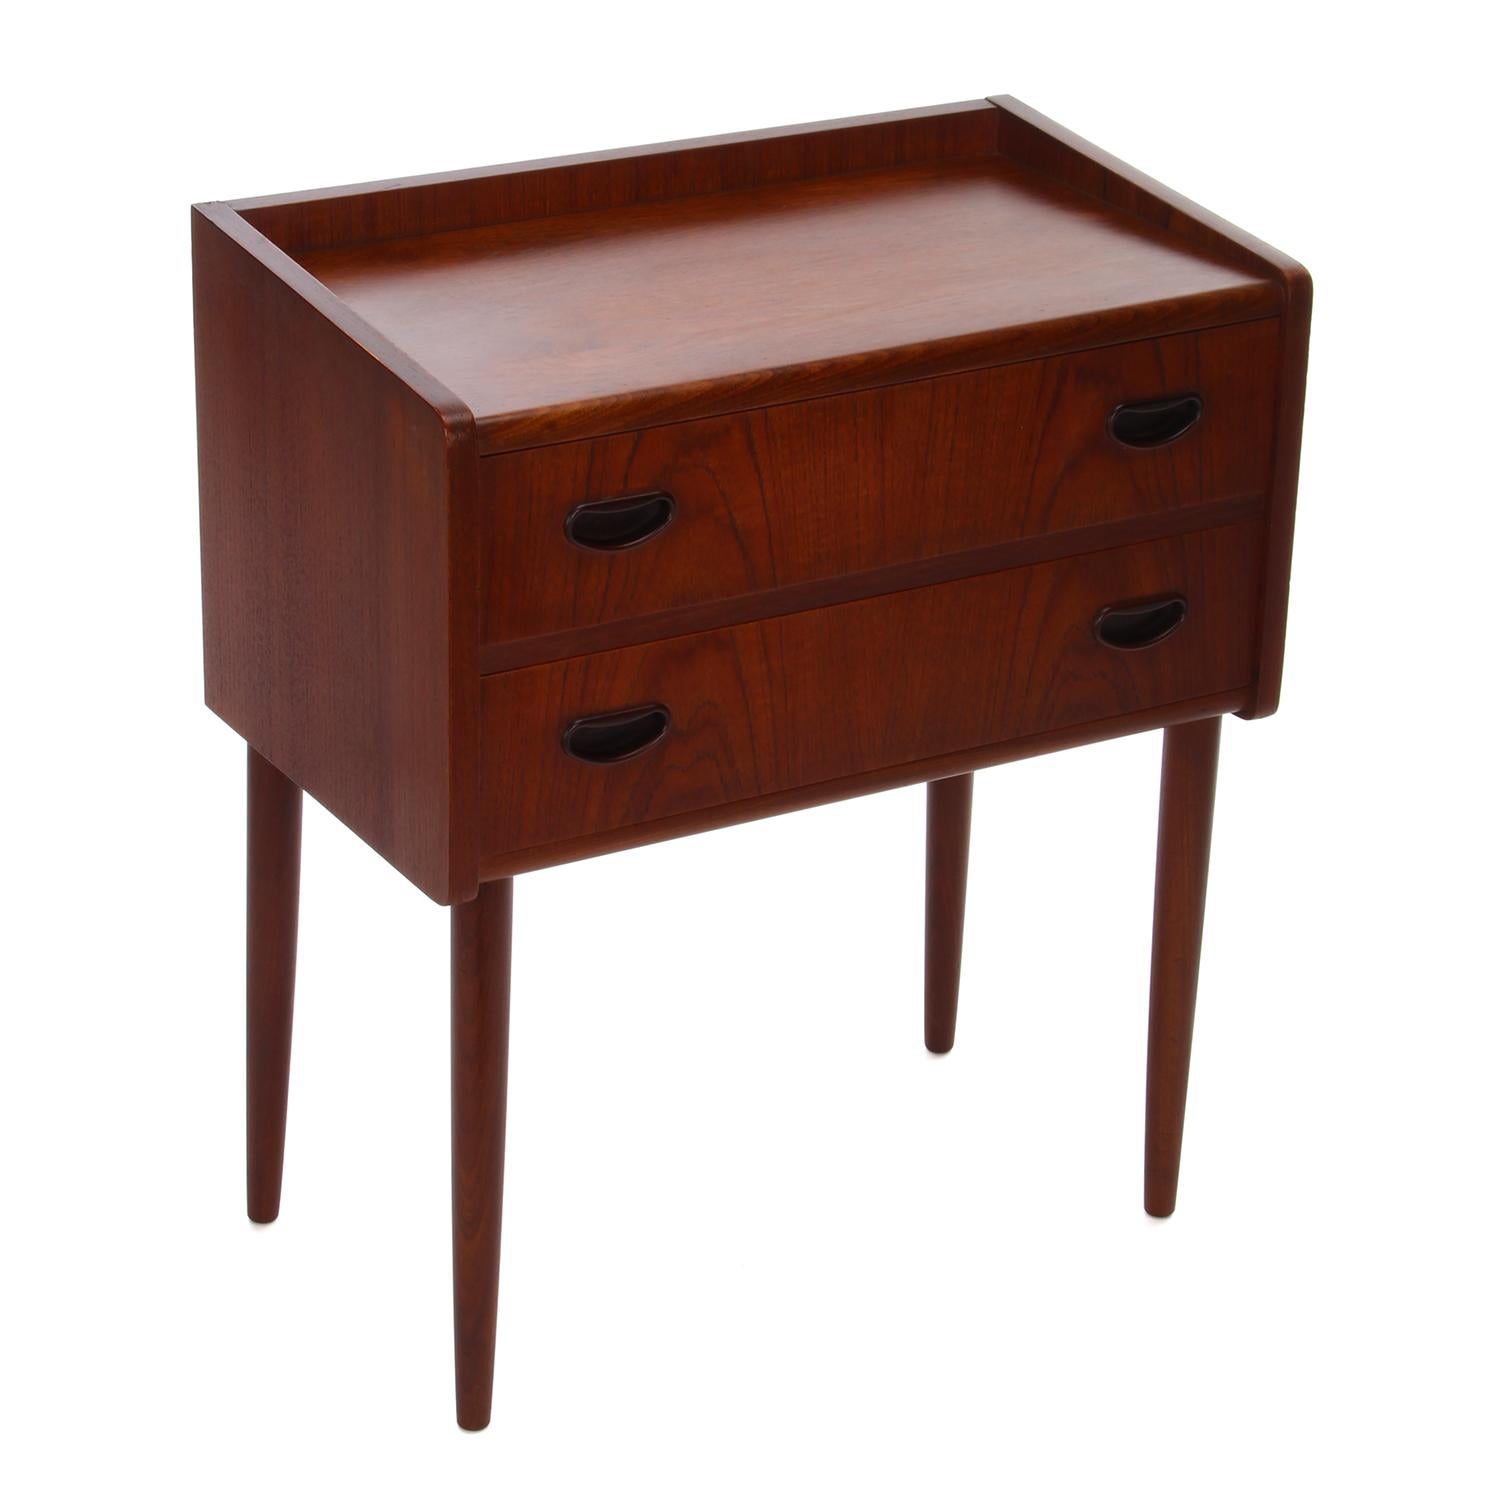 Rosewood Dresser, 1960s Danish Midcentury Chest with Drawers or Entry Table